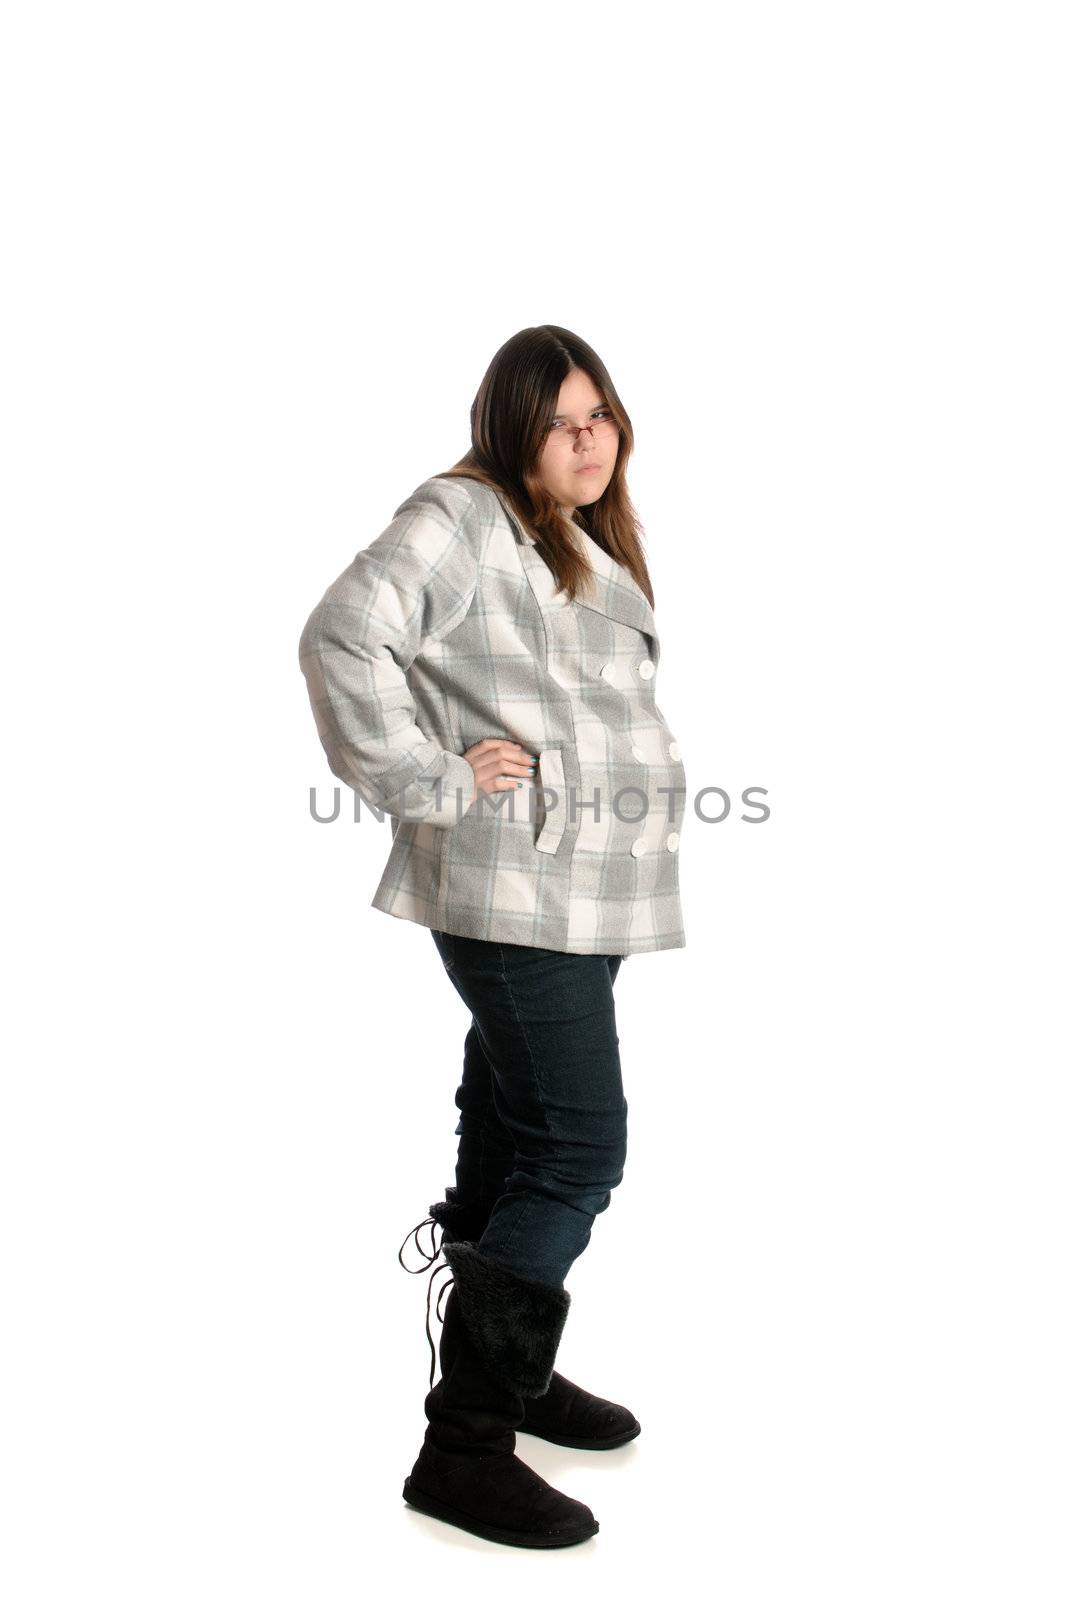 A full body view of a teenage girl looking mad and showing attitude, isolated against a white background.